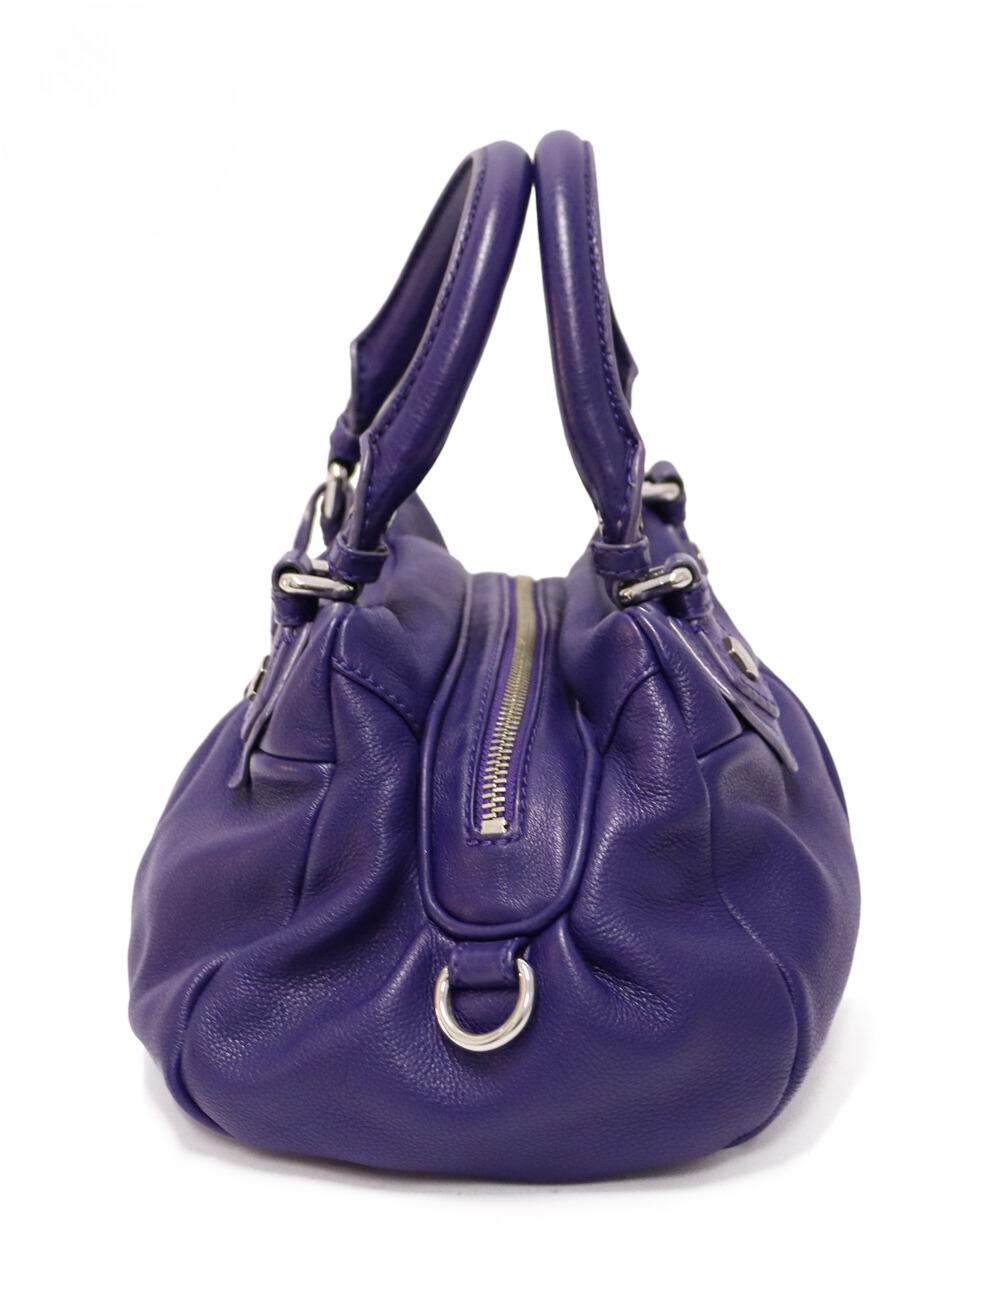 Marc by Marc Jacobs Purple Leather Classic Q Baby Groovee Bag, features two top handles, an adjustable shoulder strap, and the classic signature tag.

Material: Leather.
Hardware: Silver.
Height: 19cm
Width: 31cm
Depth: 12cm
Strap Length: